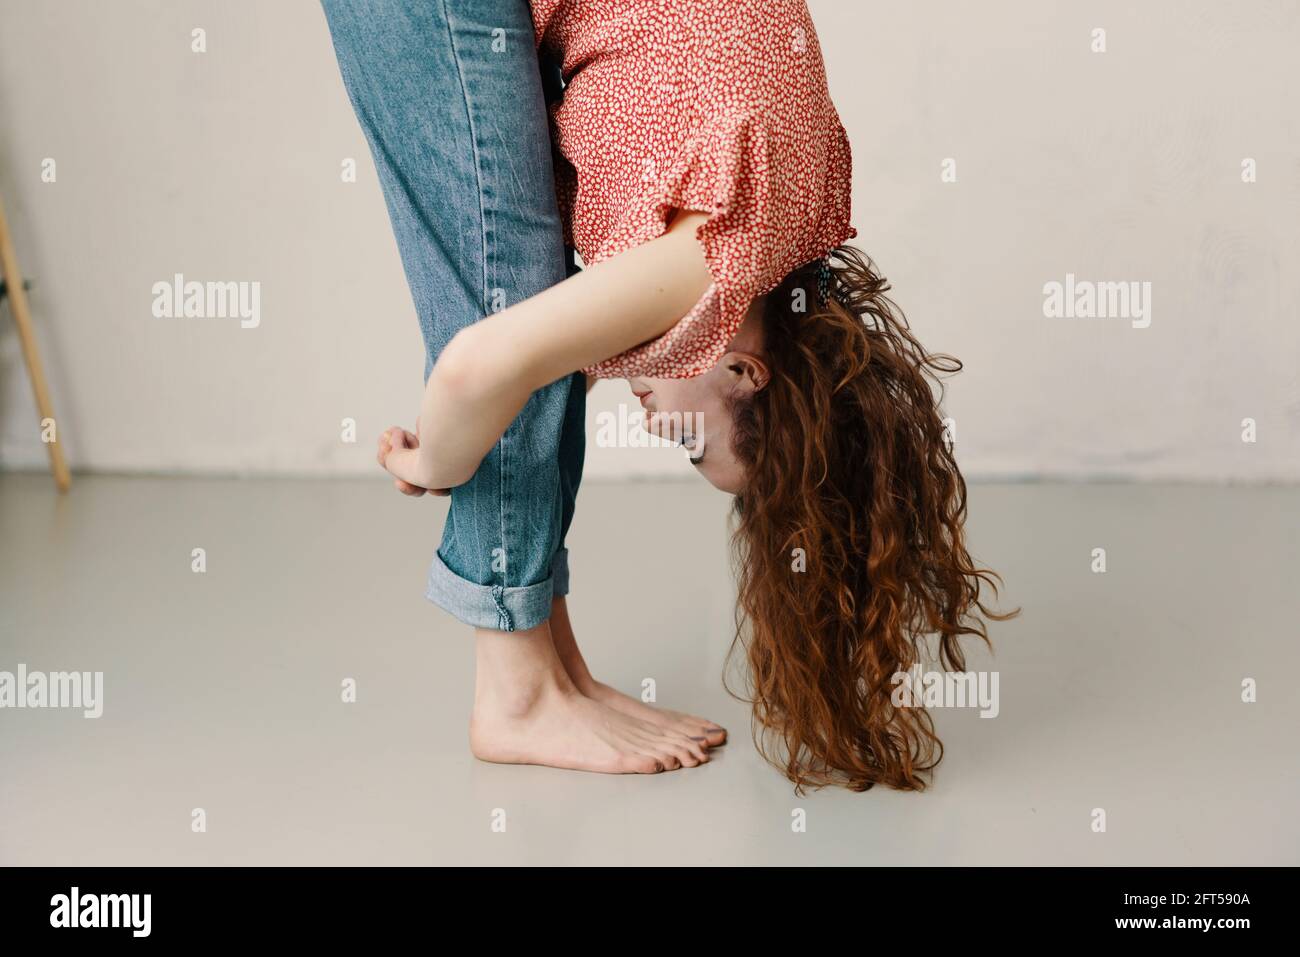 Young redhead woman bending forwards doing stretch exercises with her long hair falling forward in a close up cropped side view in a health and fitnes Stock Photo